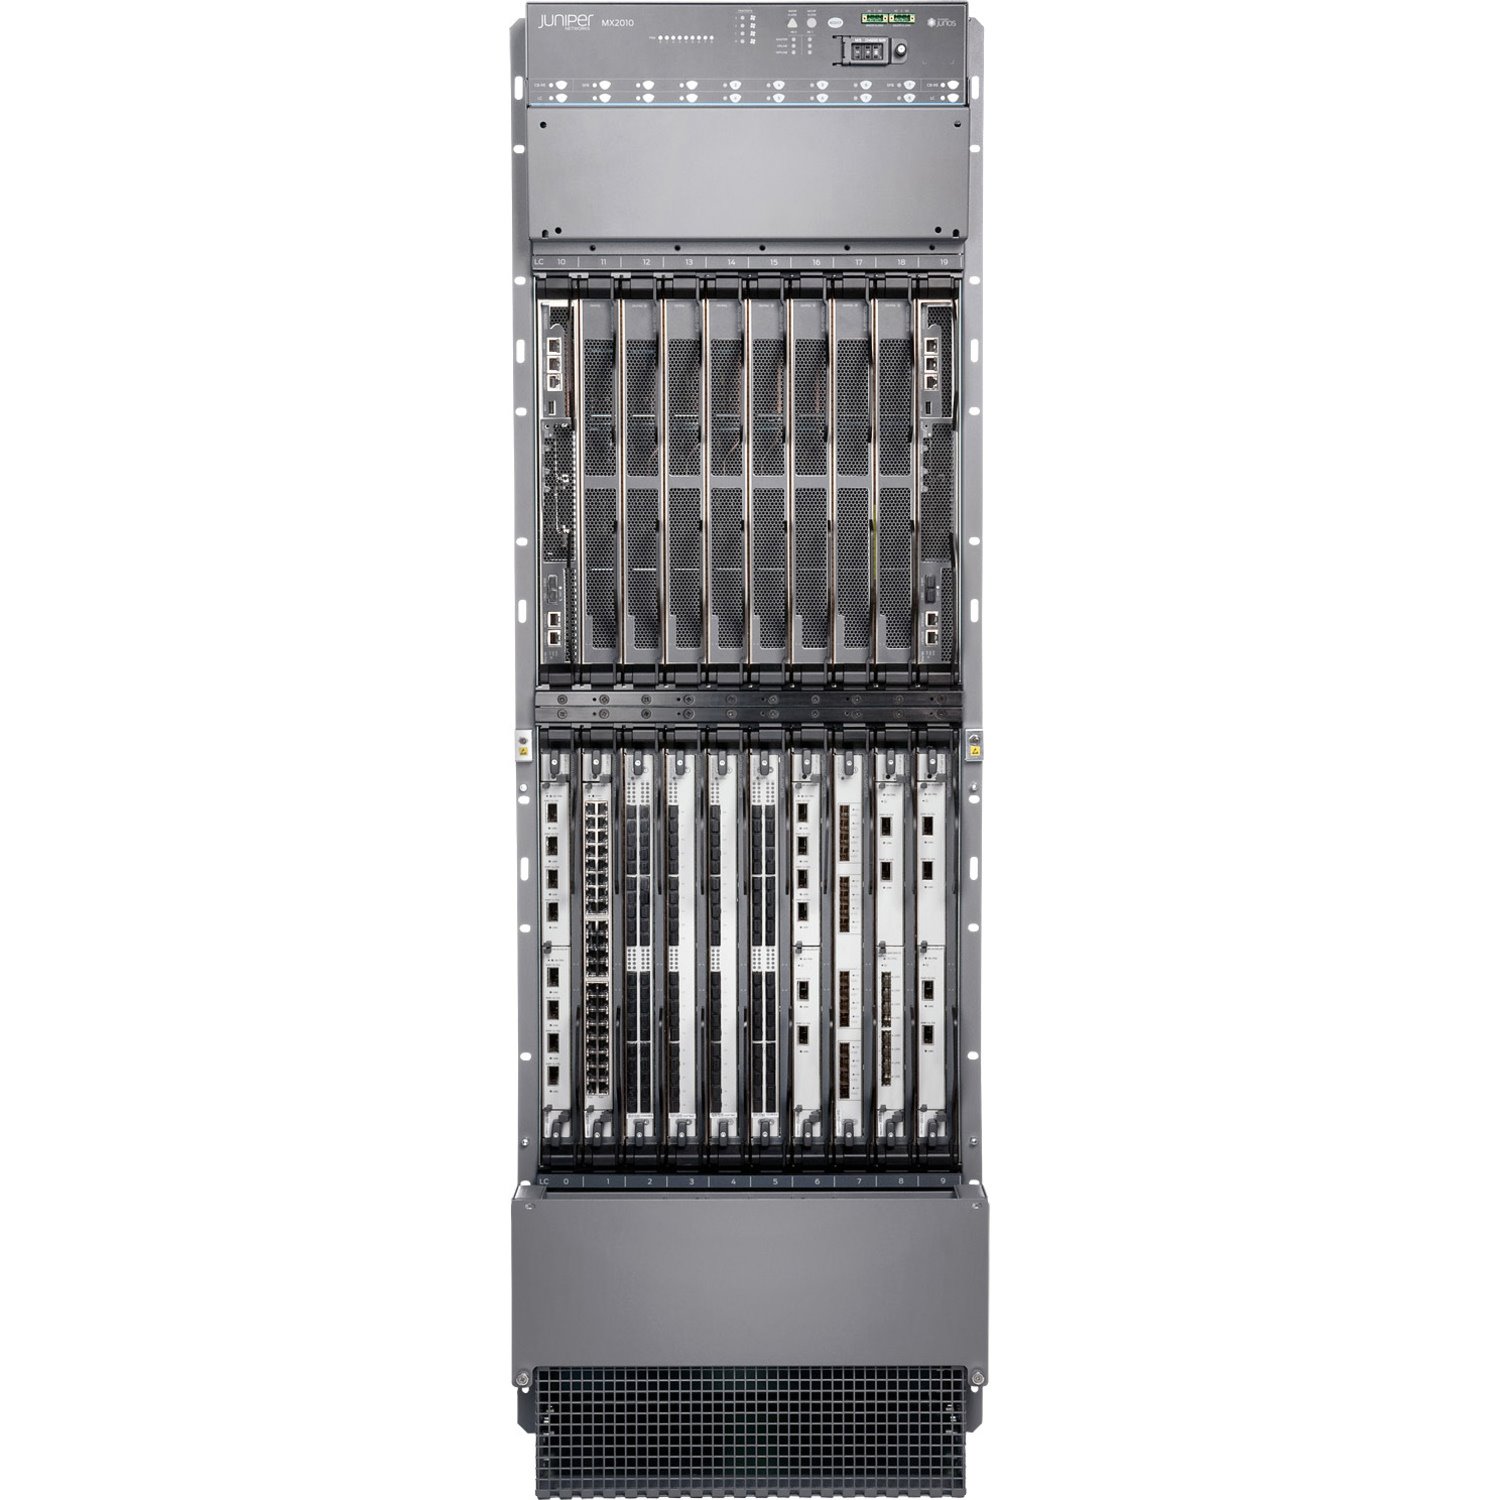 Juniper MX MX2010 Router Chassis